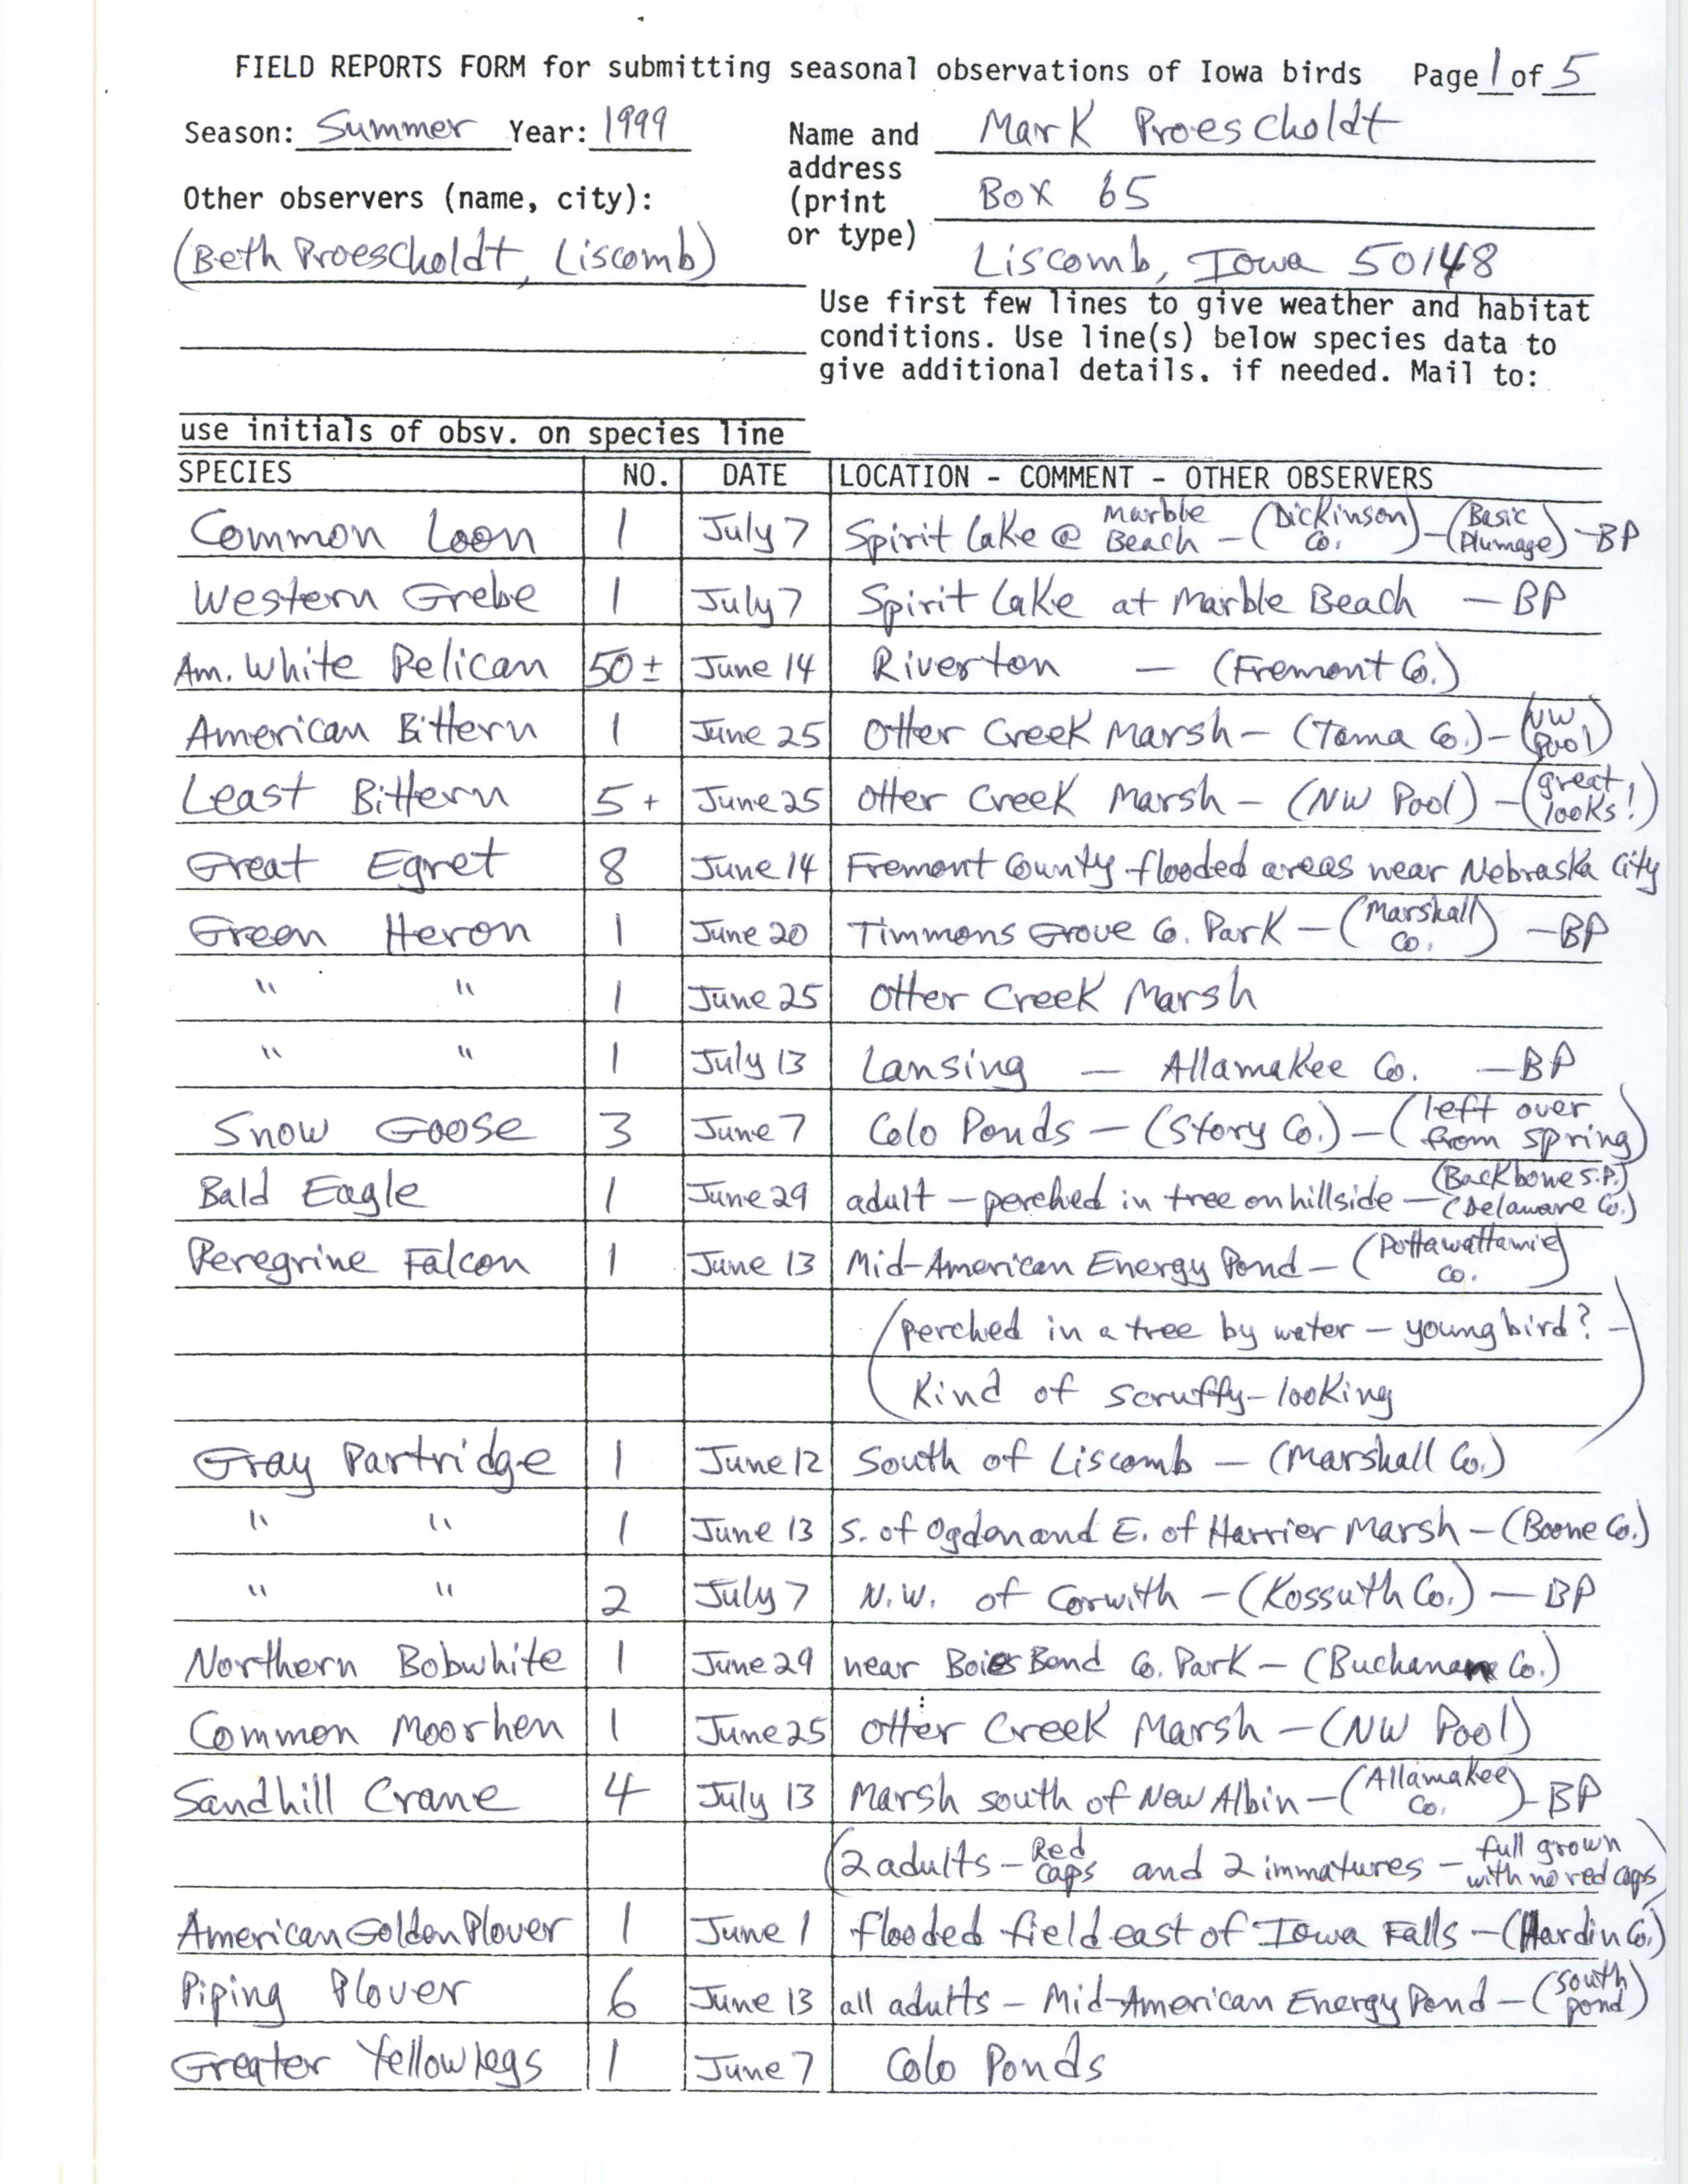 Field reports form for submitting seasonal observations of Iowa birds, Summer 1999, Mark Proescholdt